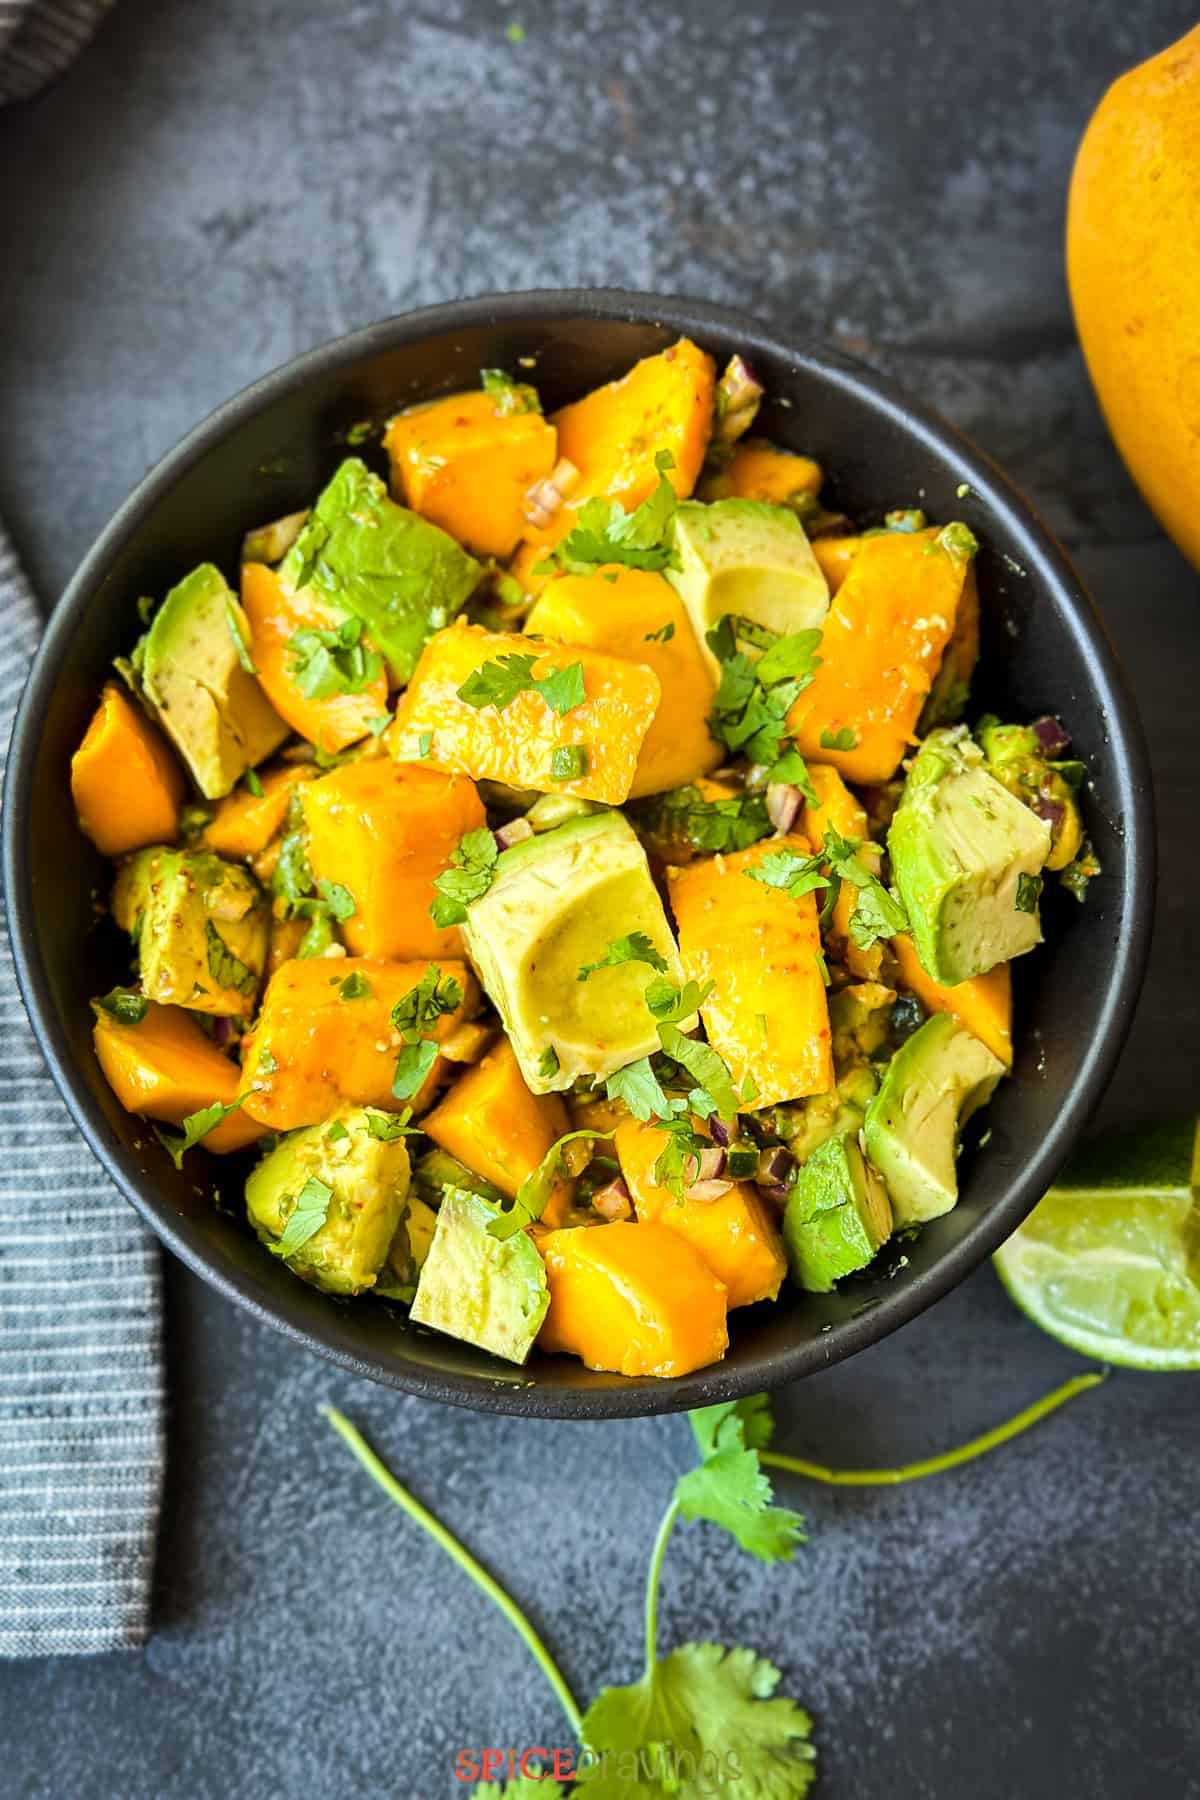 Avocado and mango chunks in bowl garnished with cilantro